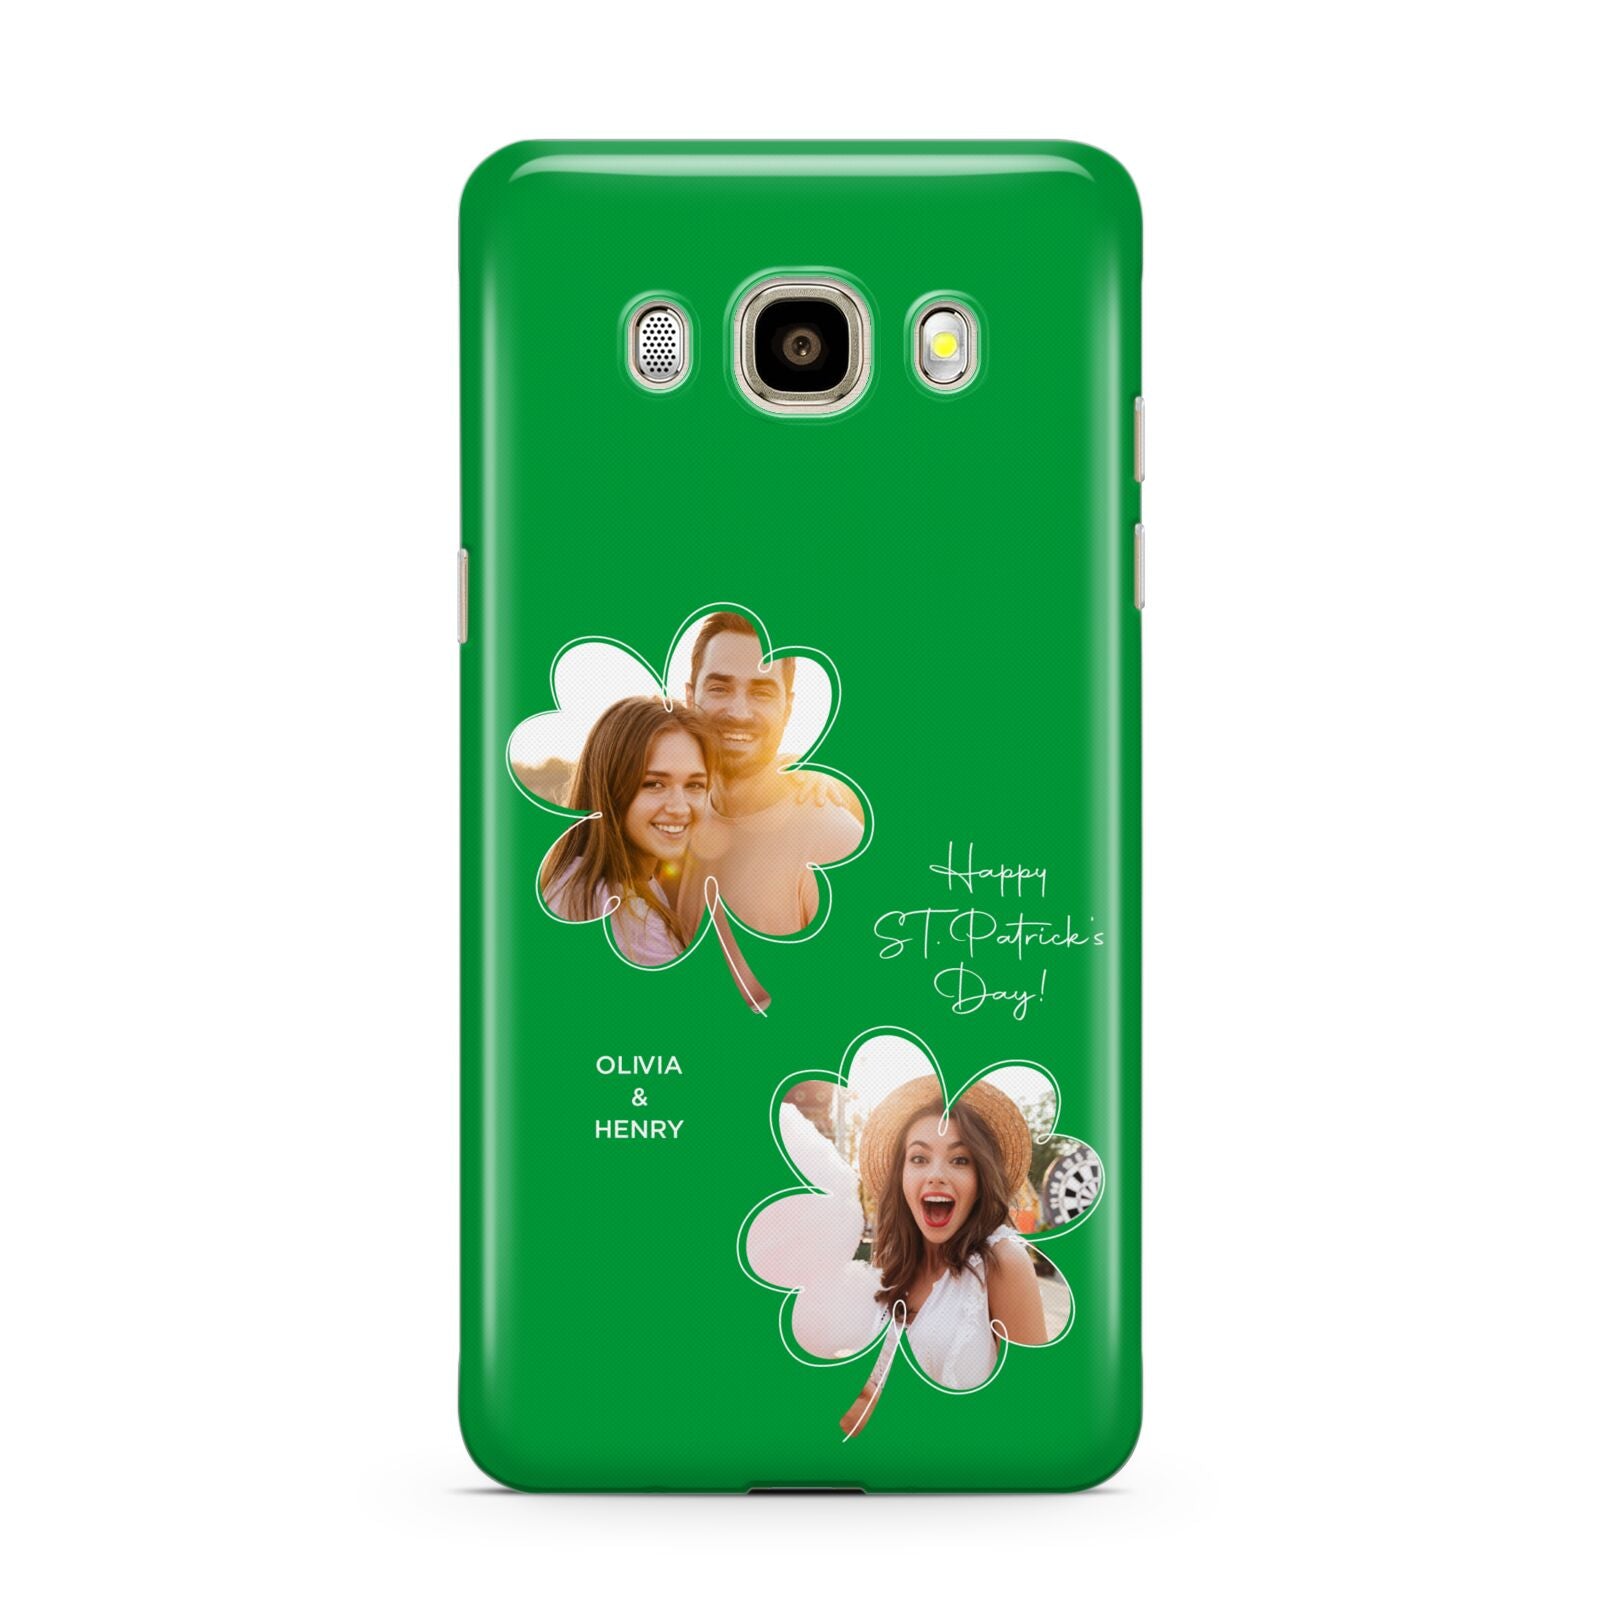 Personalised Photo St Patricks Day Samsung Galaxy J7 2016 Case on gold phone